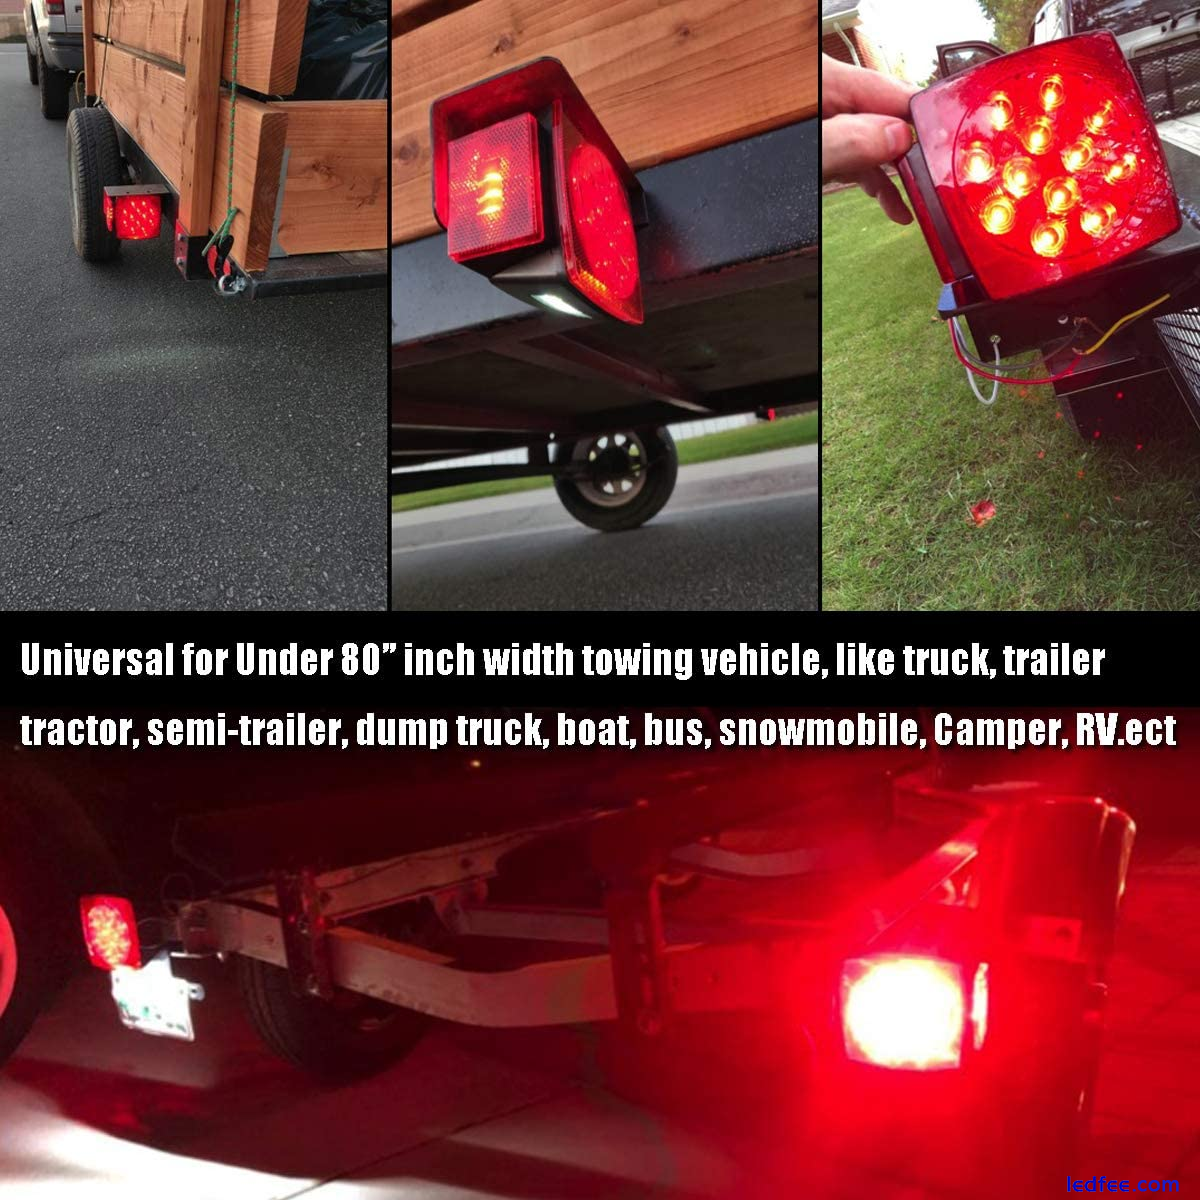 Waterproof Square LED Trailer Light Kit Utility Trailer Accessories Camper Truck 0 